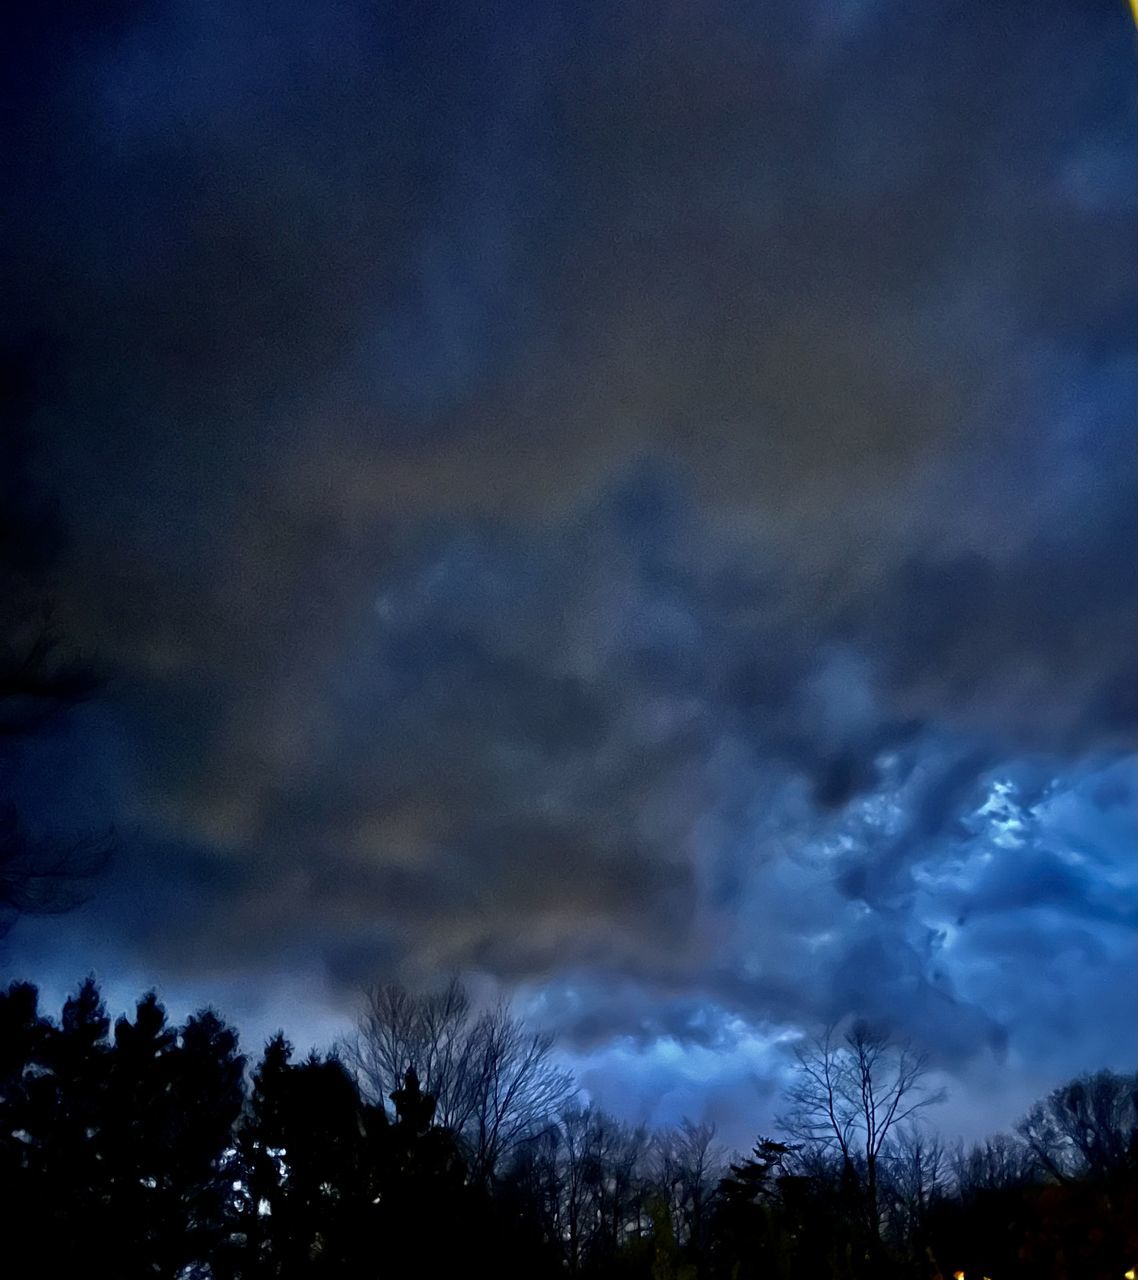 sky, cloud, tree, beauty in nature, darkness, plant, night, scenics - nature, nature, silhouette, no people, storm, dramatic sky, tranquility, evening, low angle view, dusk, tranquil scene, environment, dark, outdoors, illuminated, thunder, storm cloud, overcast, cloudscape, thunderstorm, blue, atmospheric mood